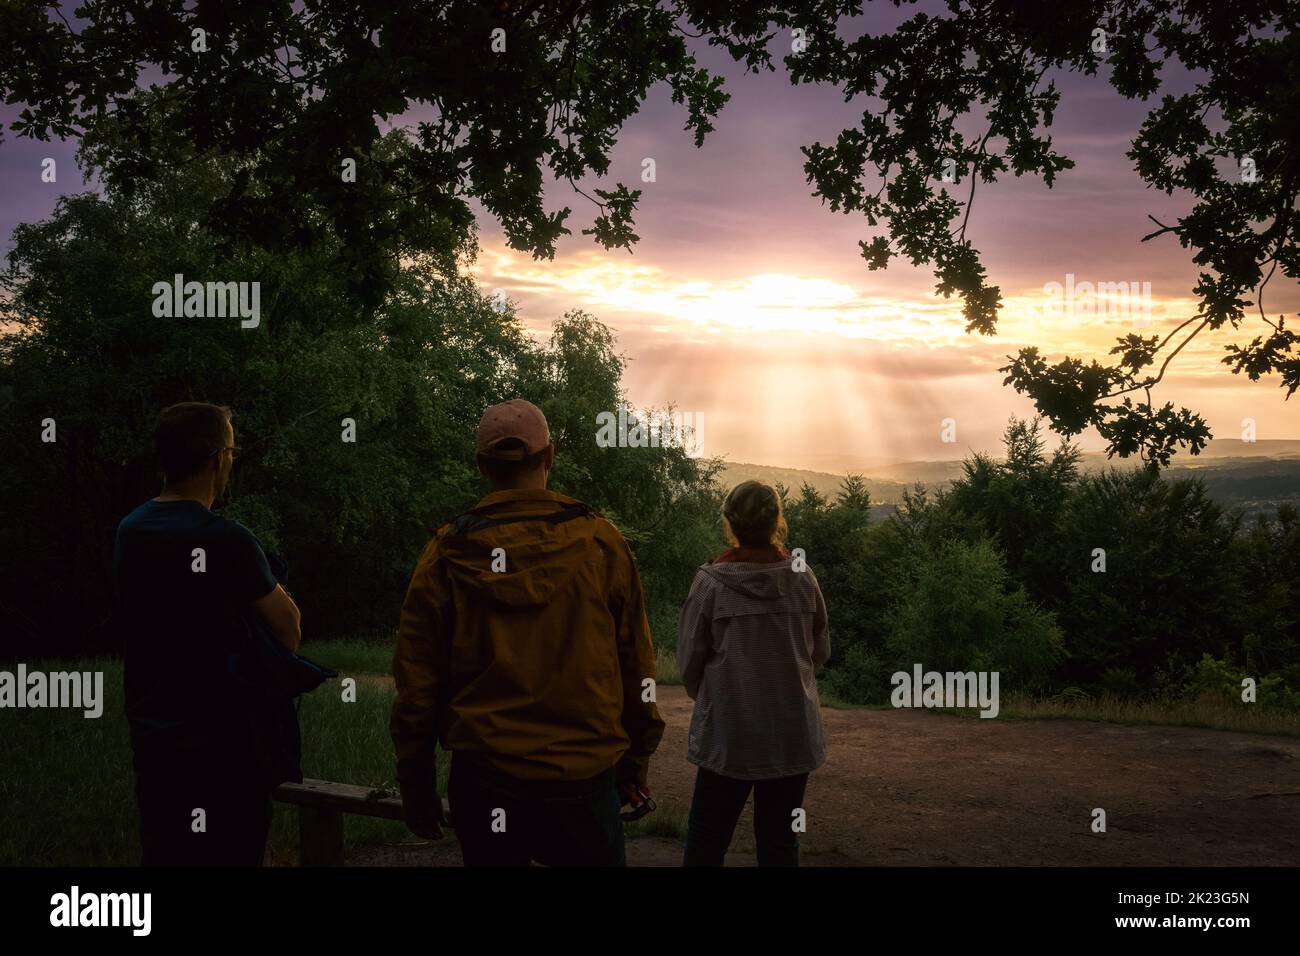 Three people watching the sun going down creating crepuscular rays in Wharfedale, Otley Chevin, West Yorkshire, England, UK Stock Photo